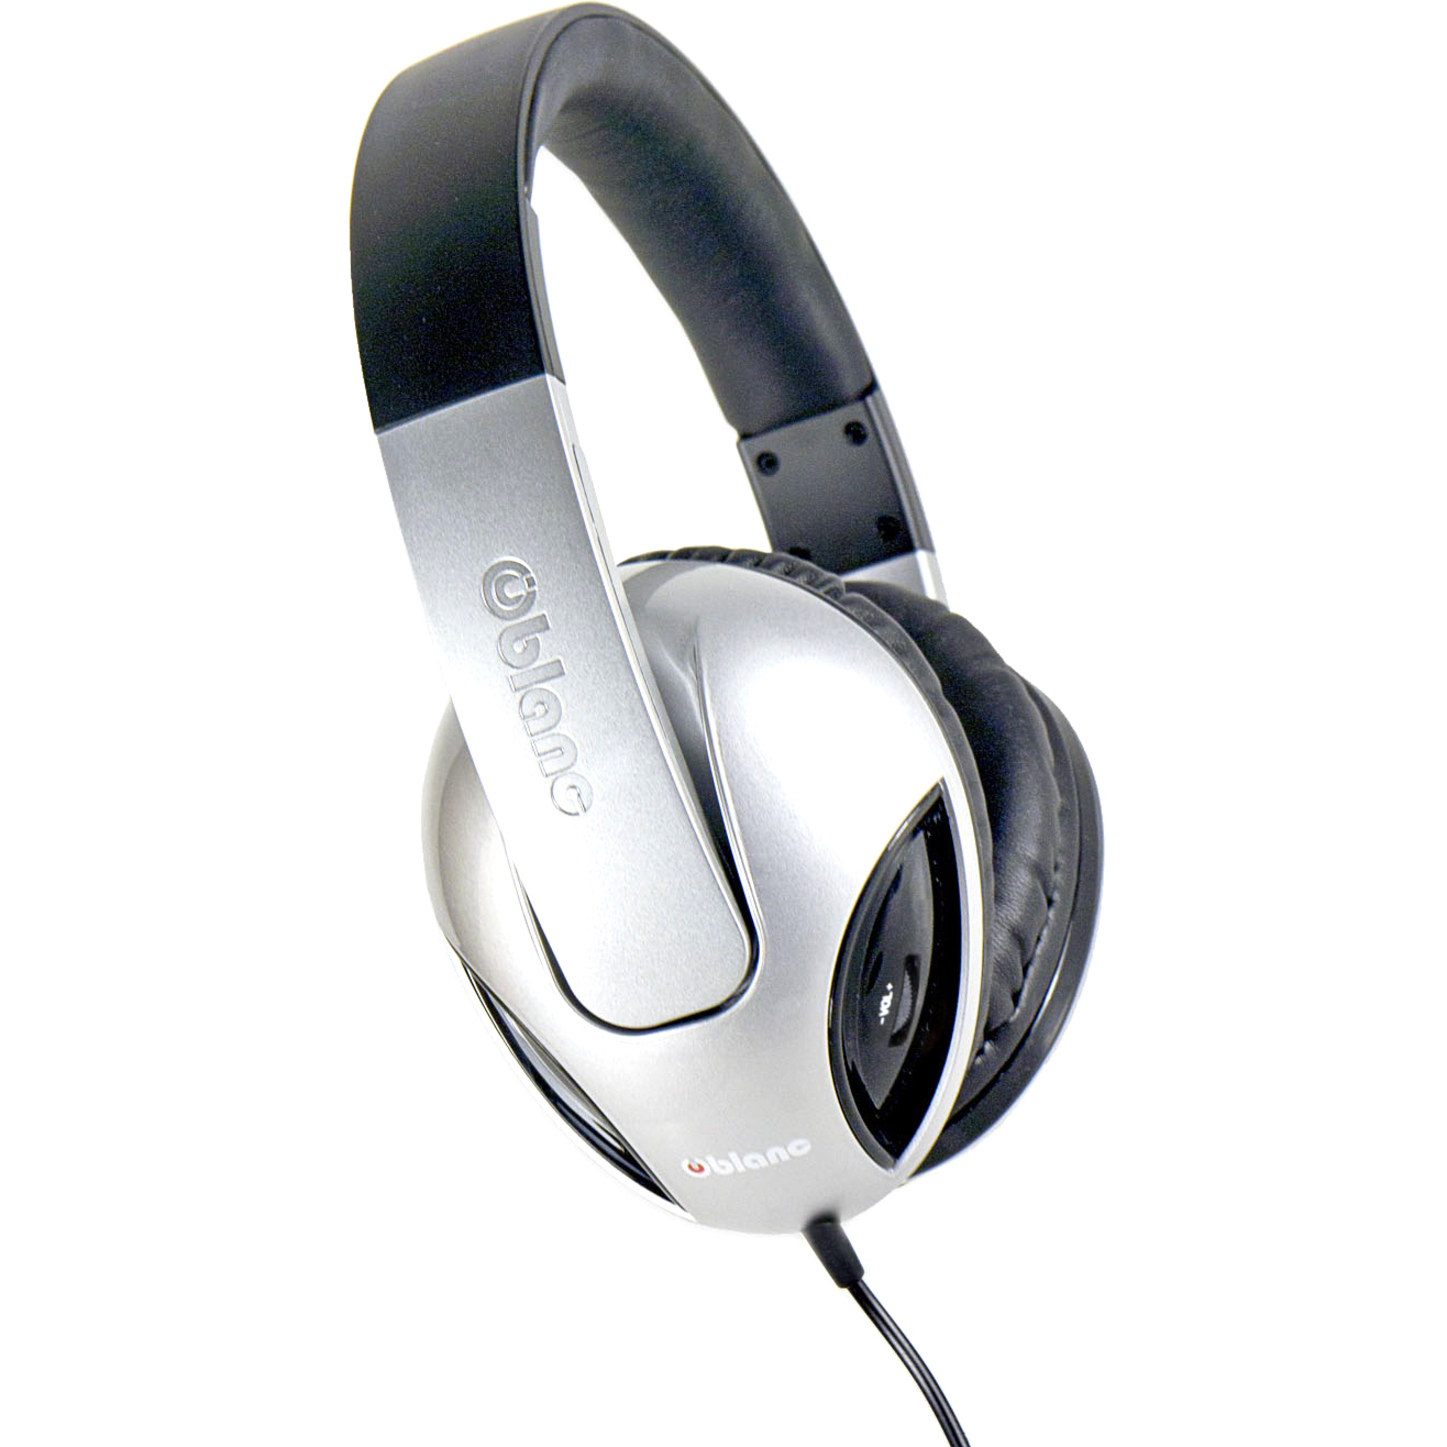 SYBA Multimedia Oblanc Cobra Silver Subwoofer Headphone W/In-line Microphone - image 2 of 2